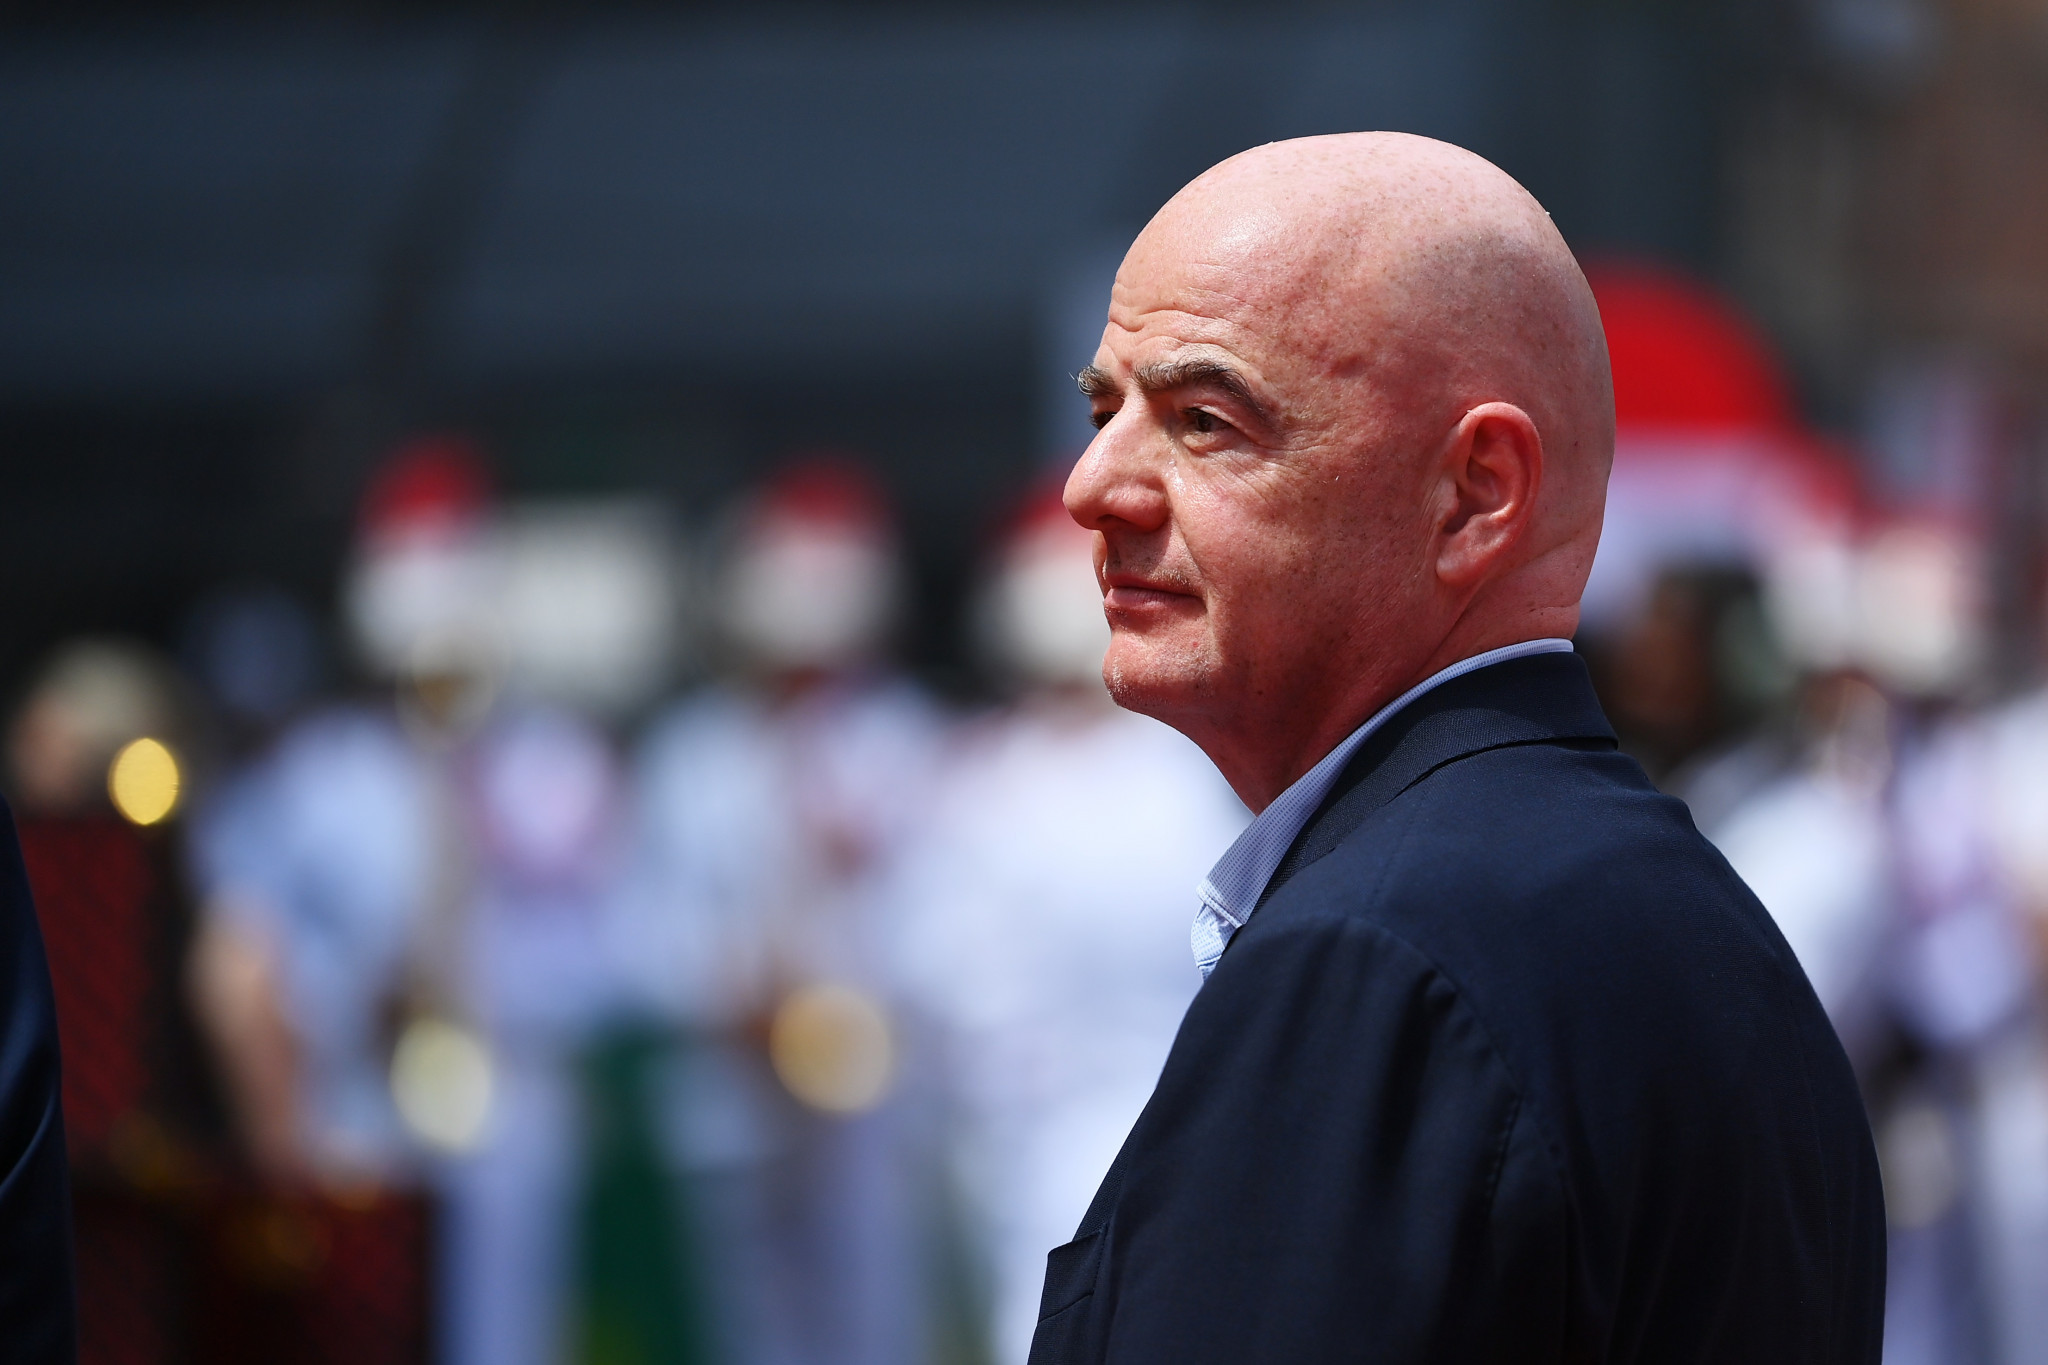 FIFA President Gianni Infantino has described offers to televise the FIFA Women's World Cup as a 